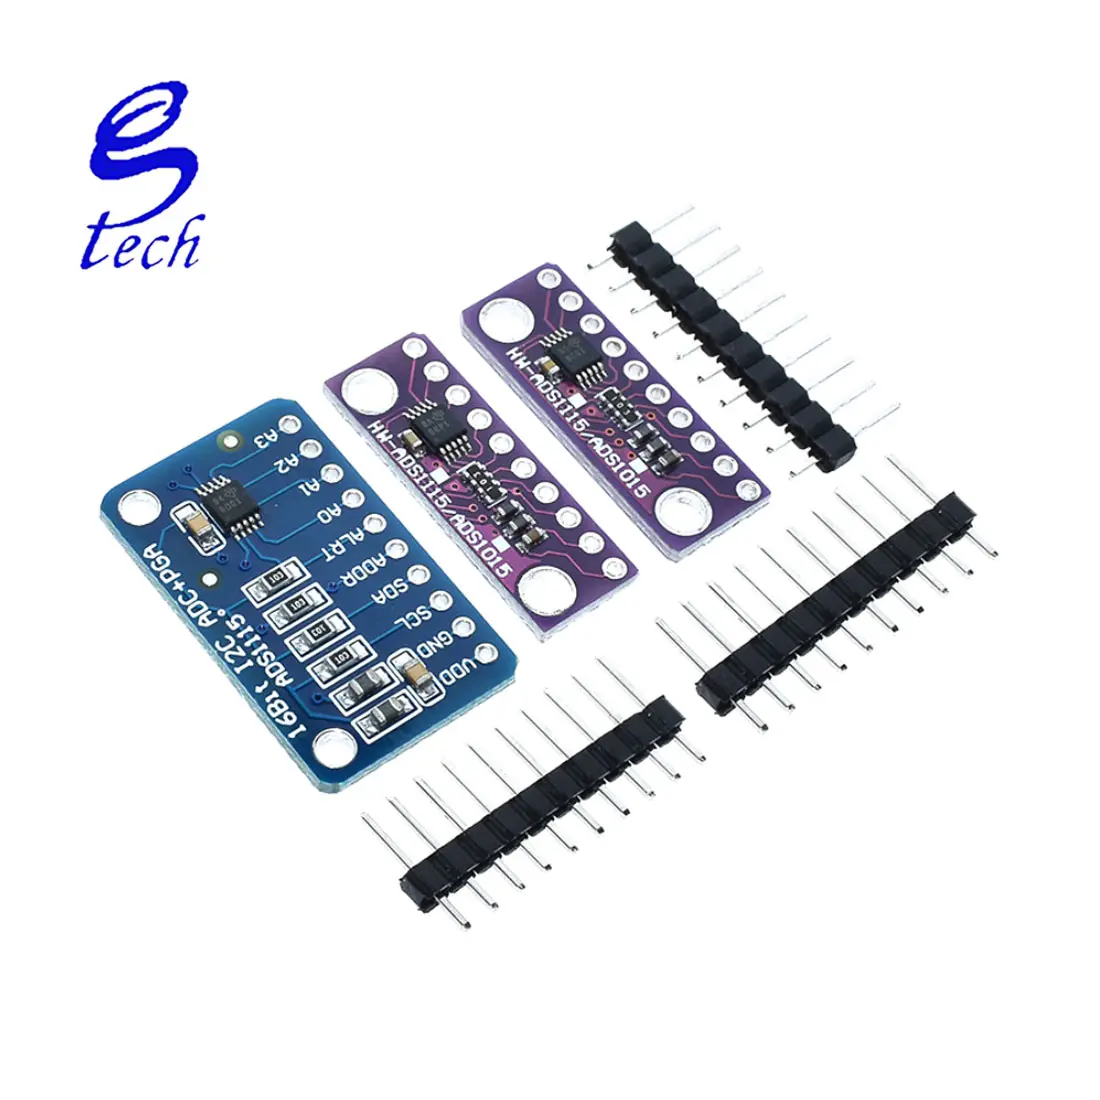 Hot Original Electronic Components 16 Bit I2C ADS1115 ADS1015 Module ADC 4 channel with Pro Gain Amplifier 2.0V to 5.5V